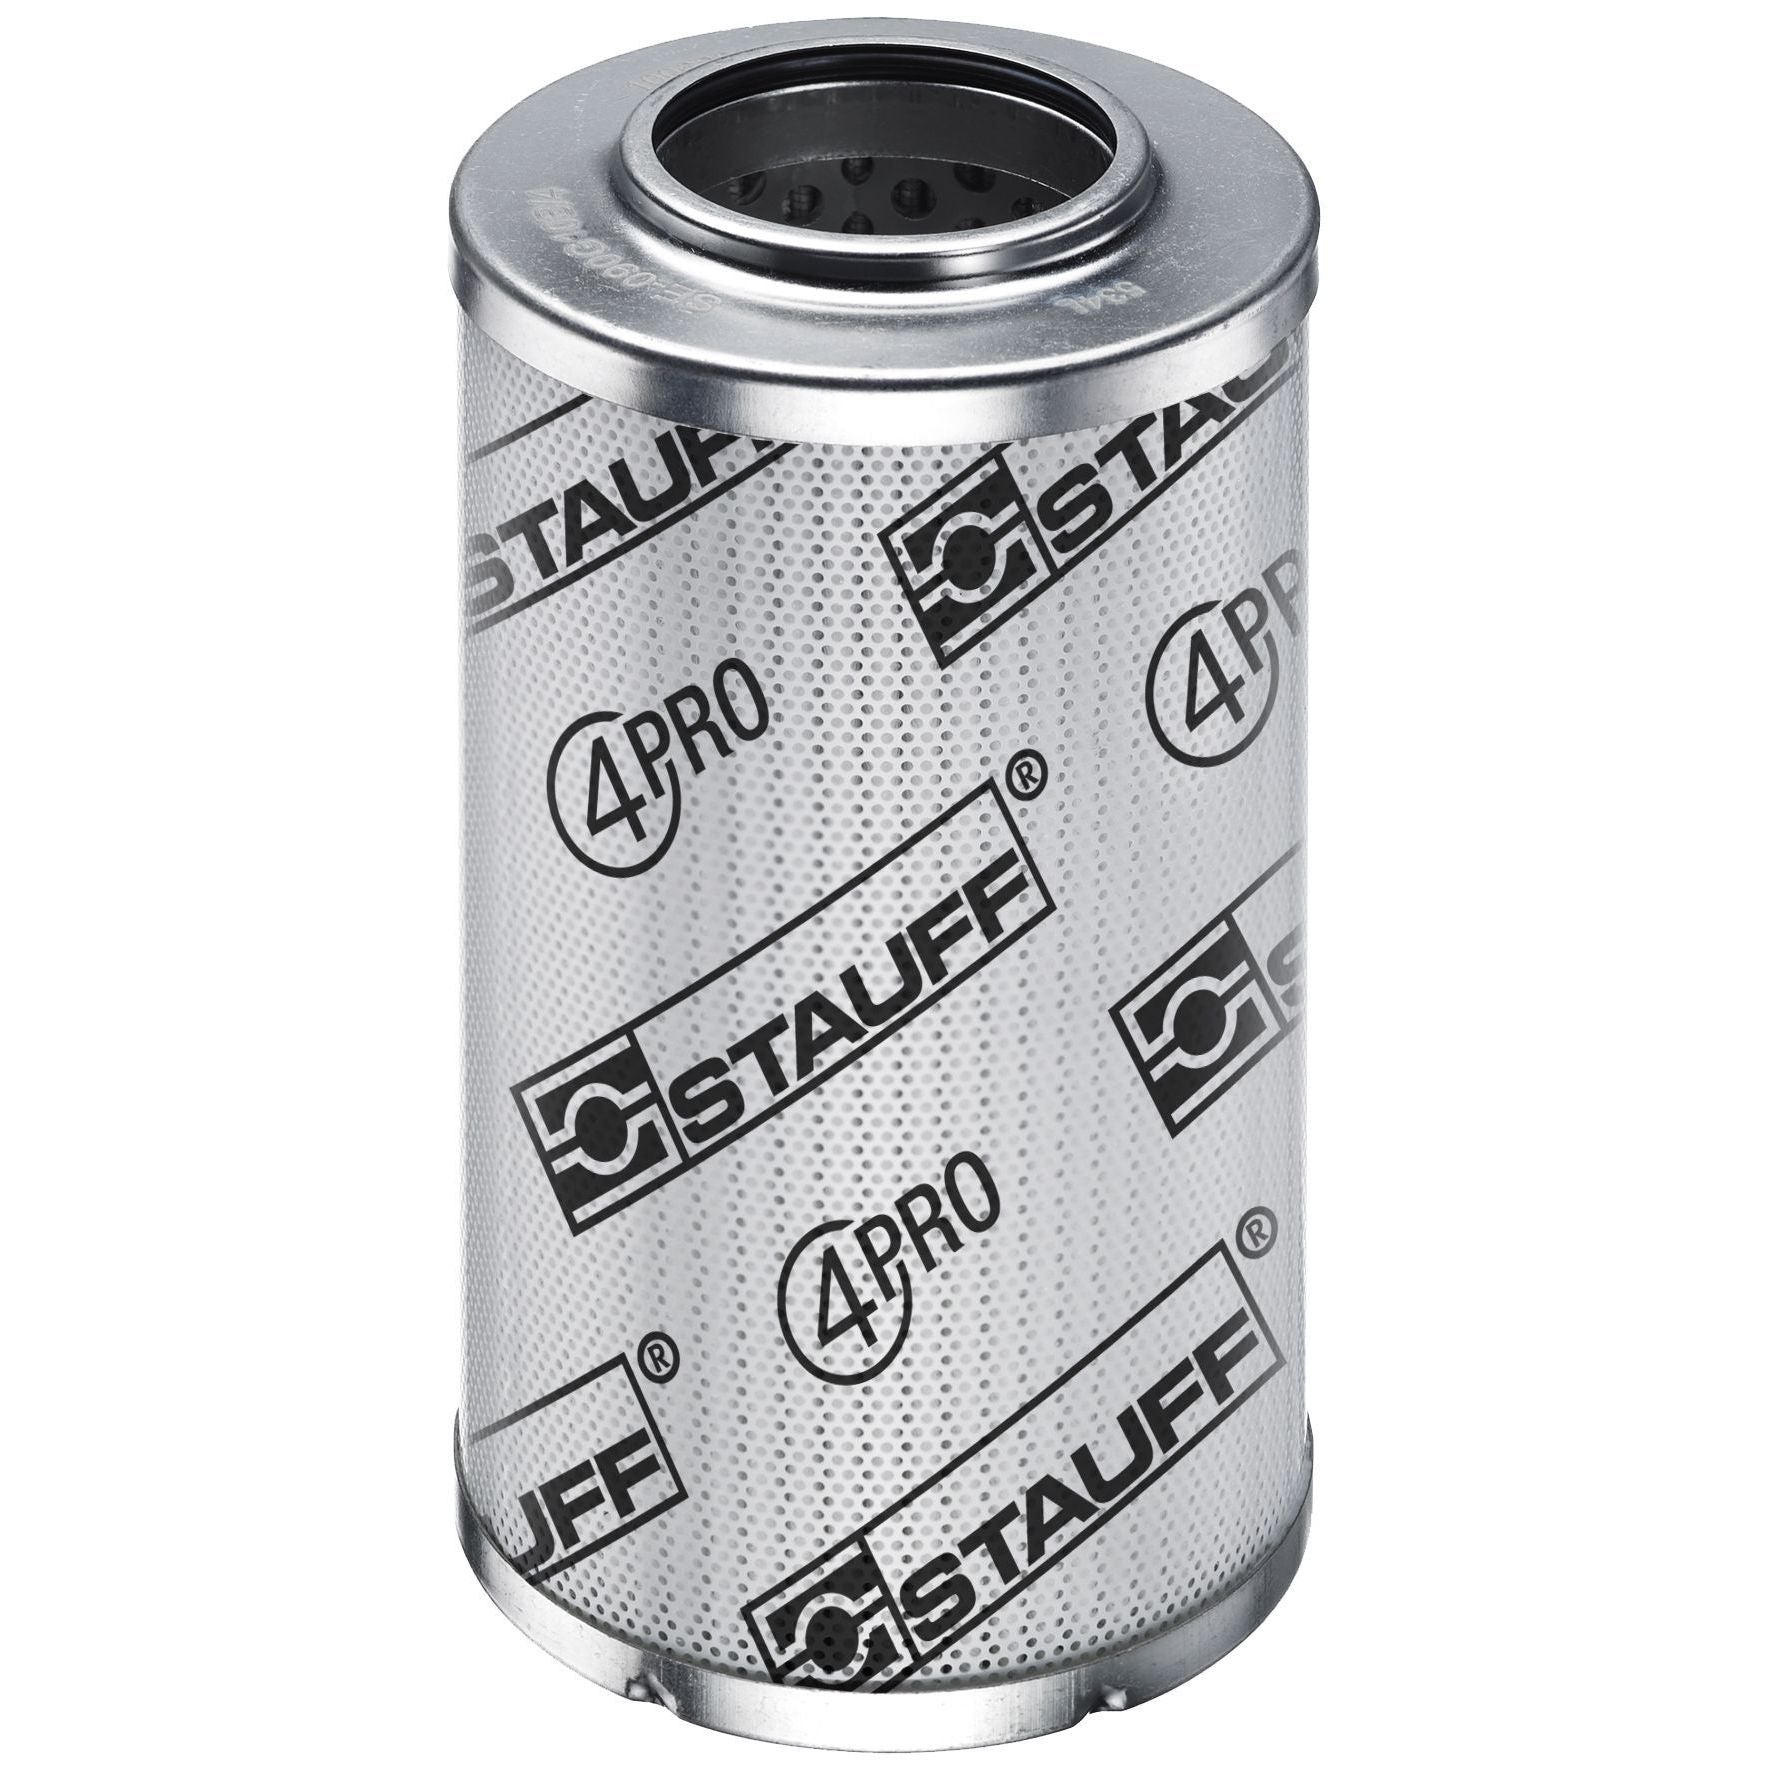 SE-045-H-10-V/4 : Stauff SF-045 Series Filter Element, 10 Micron, Synthetic, 3045psi Collapse Differential, Viton Seals